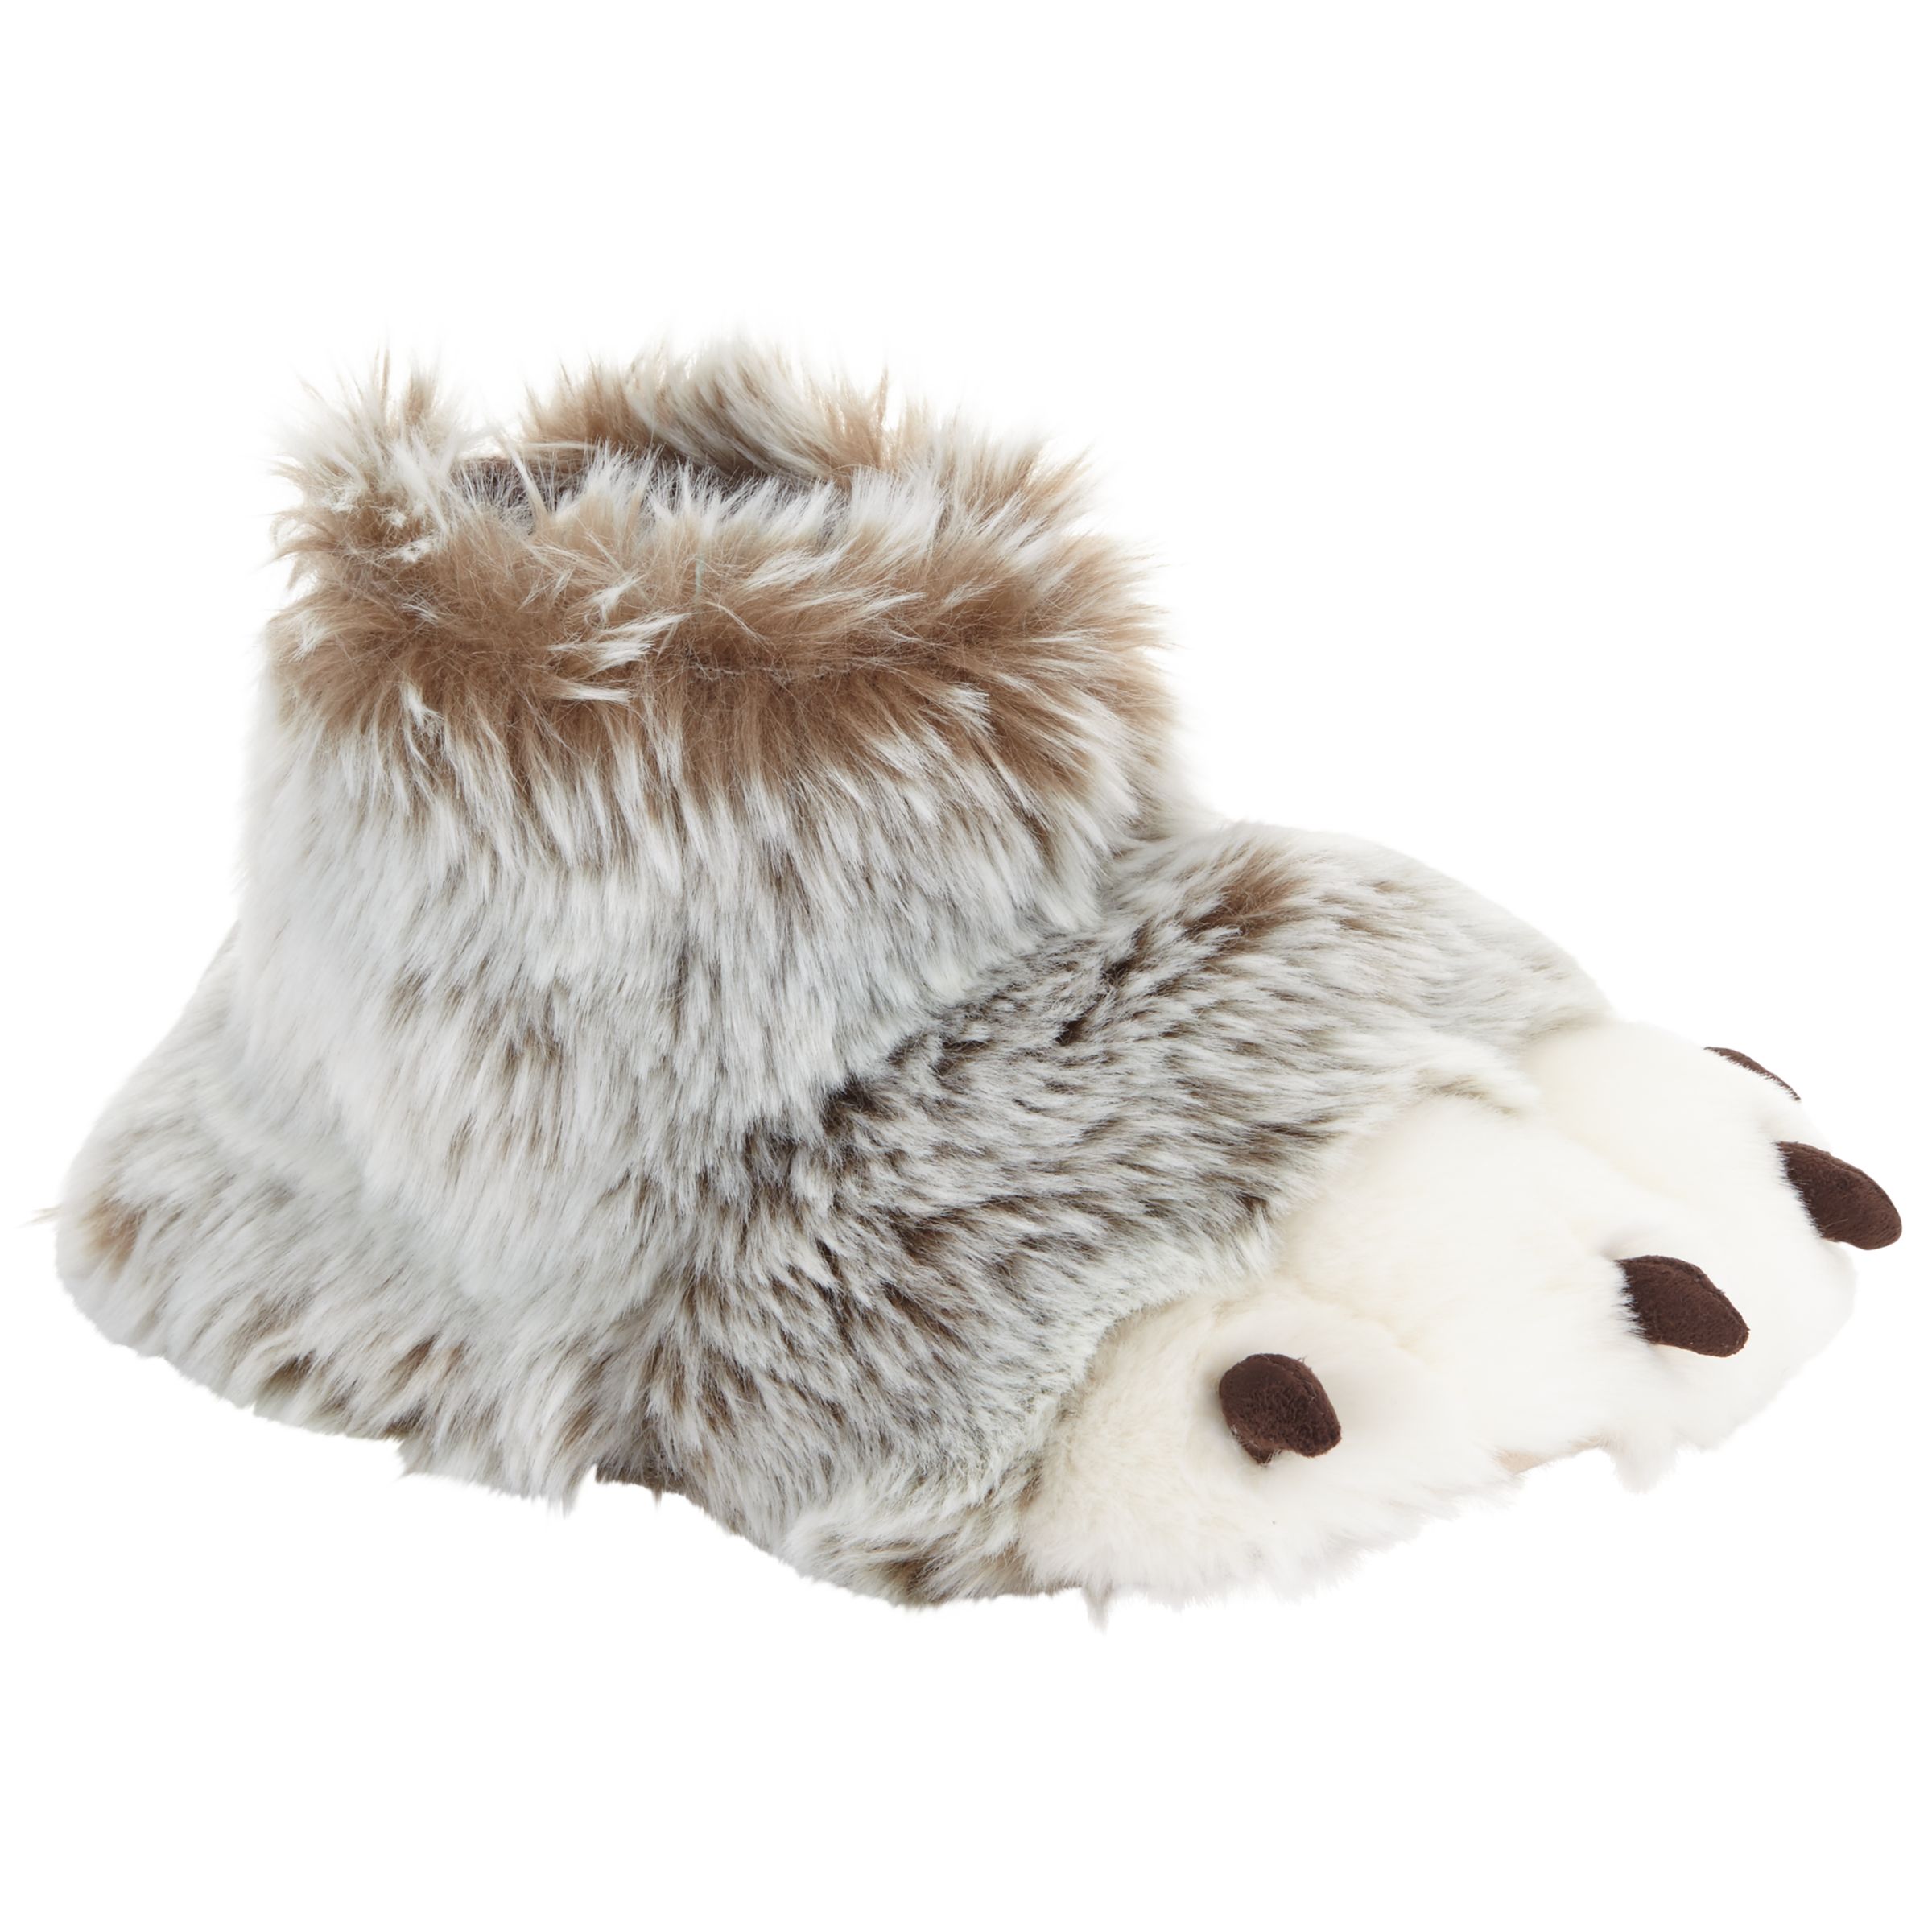 John Lewis Kids' 3D Claw Boot Slippers, Brown/White